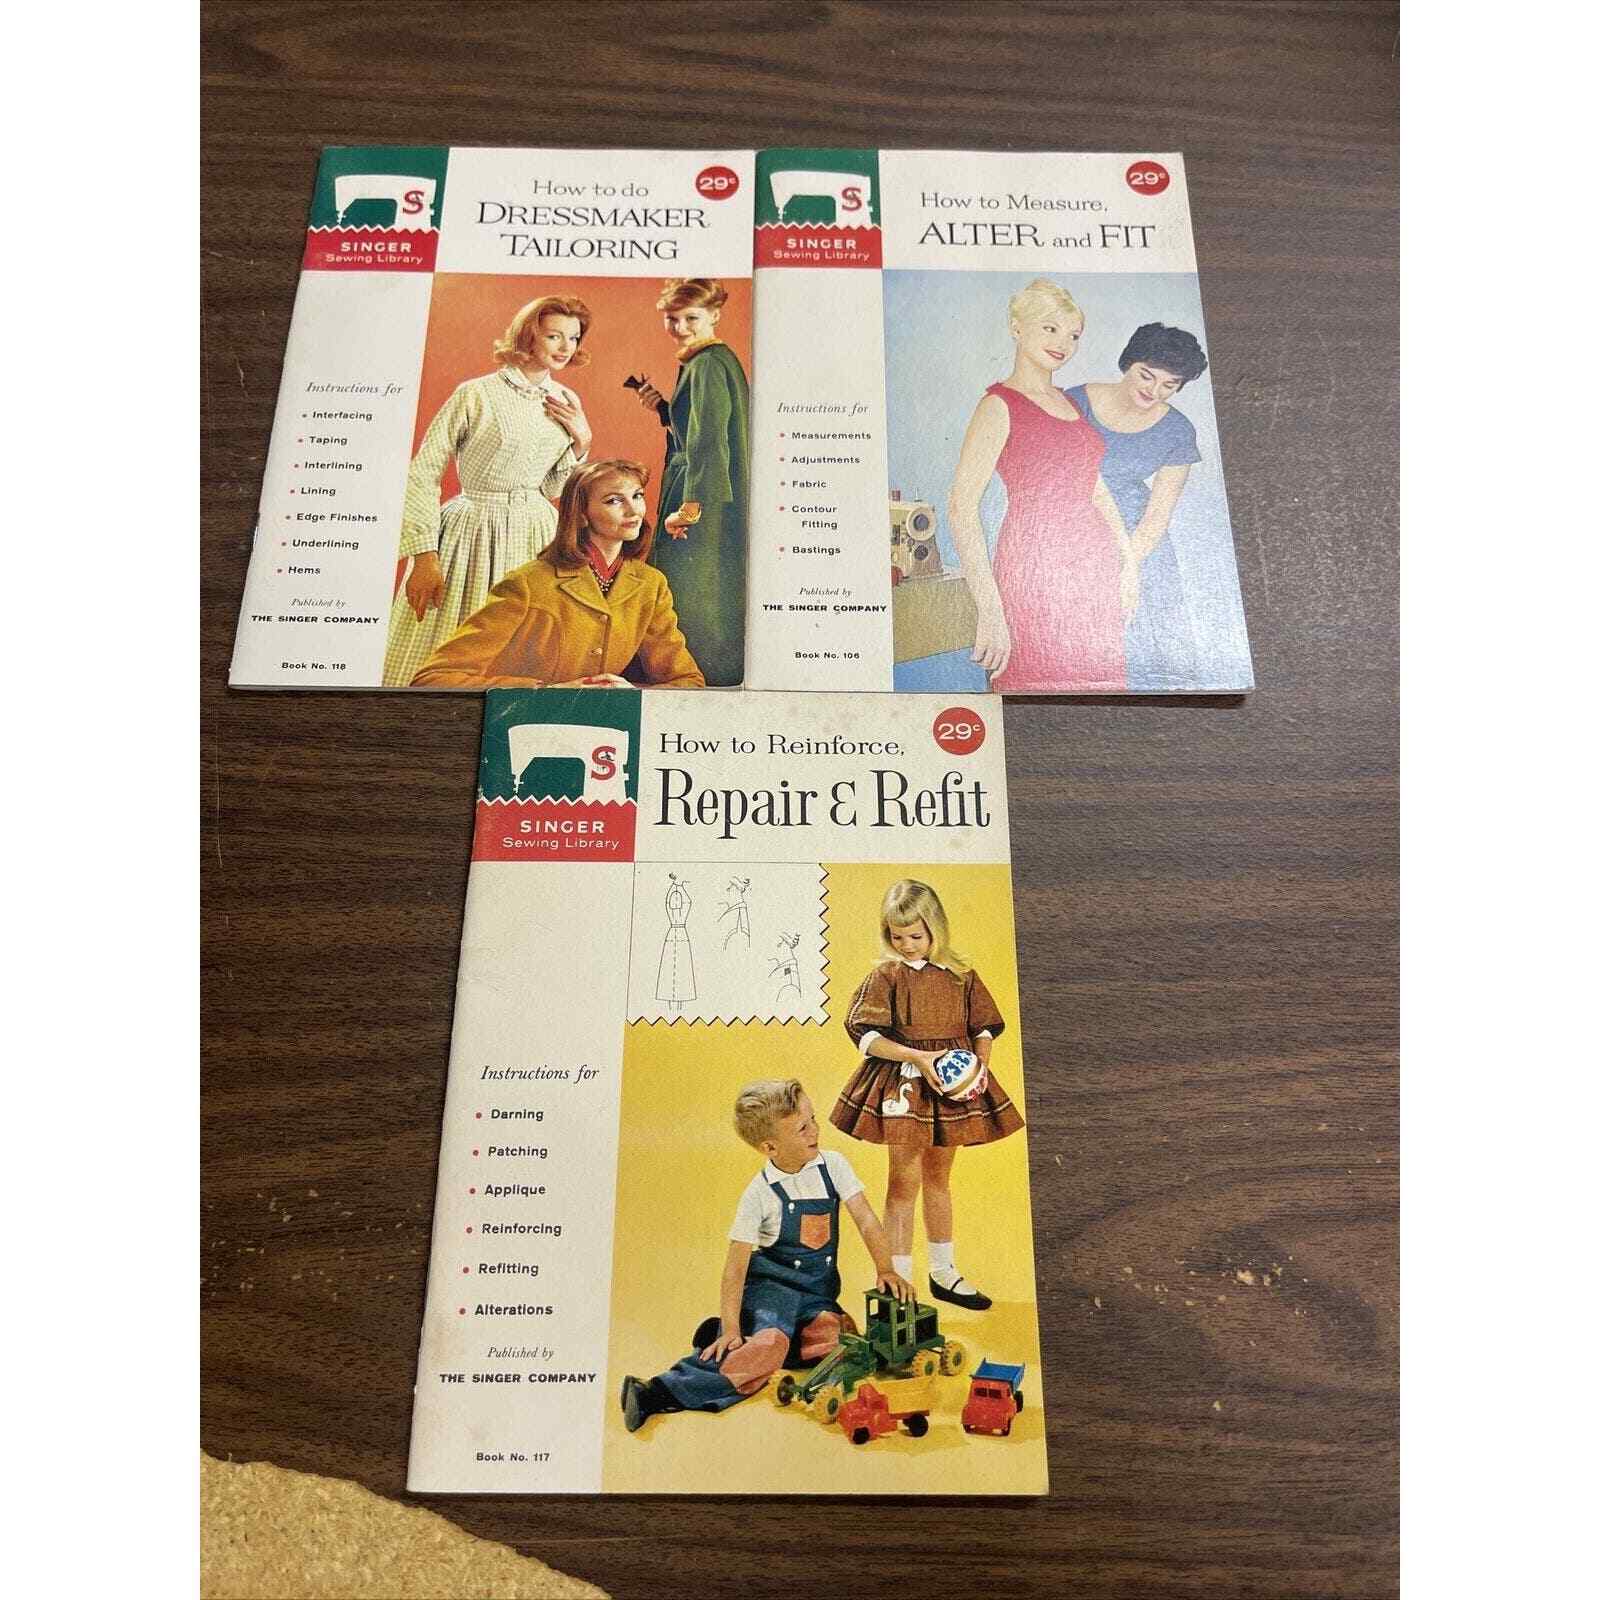 Singer How To Measure, Alter and Fit & Dressmaker Tailoring How-To Books Vintage